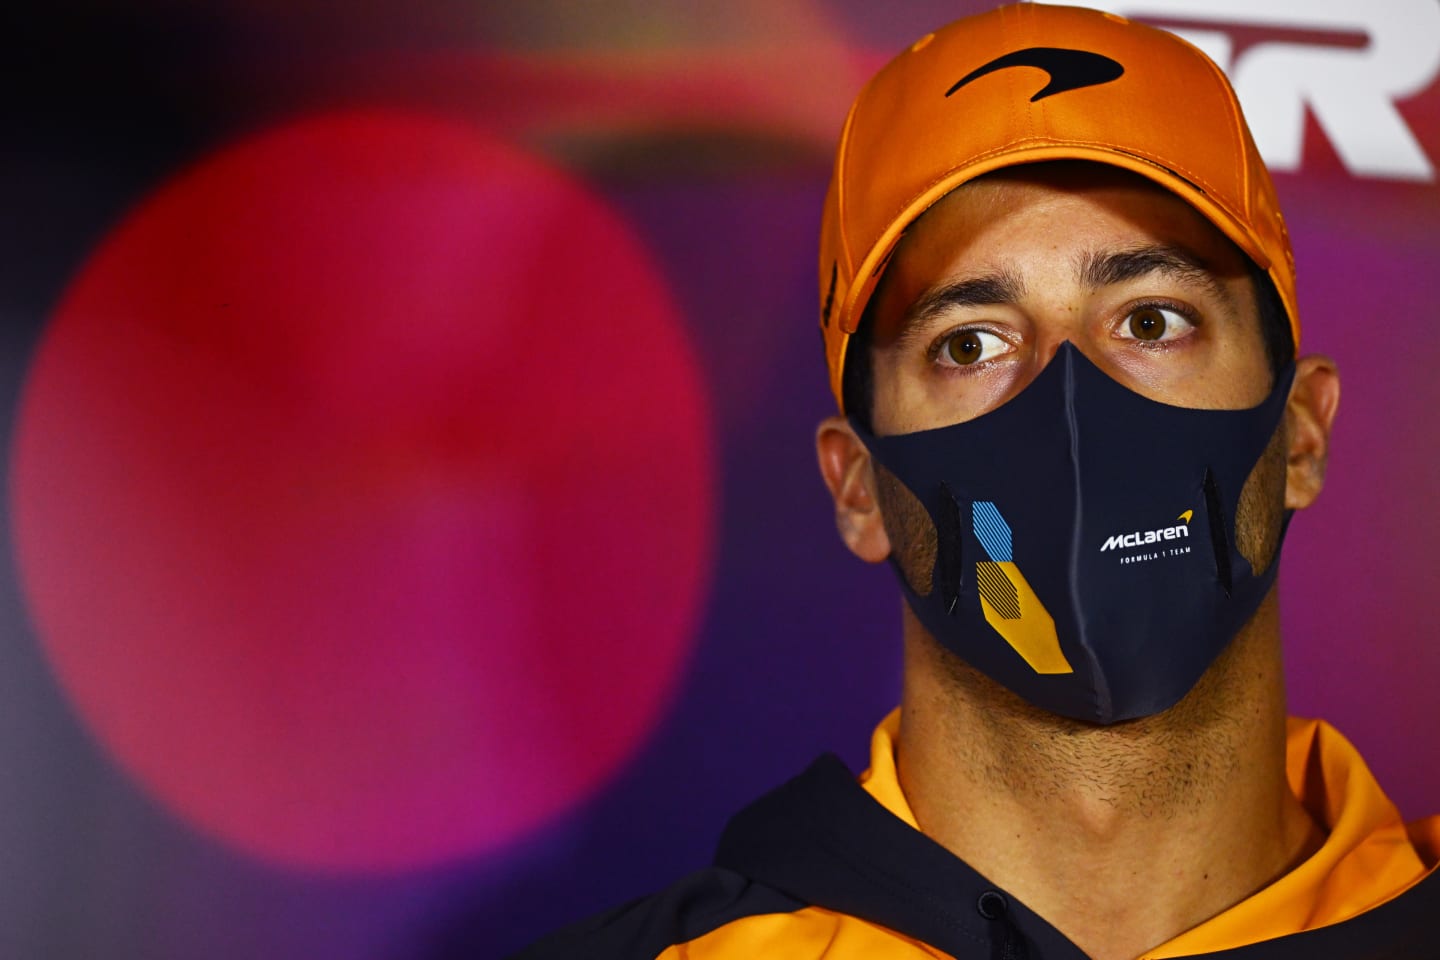 JEDDAH, SAUDI ARABIA - MARCH 25: Daniel Ricciardo of Australia and McLaren looks on in the Drivers Press Conference before practice ahead of the F1 Grand Prix of Saudi Arabia at the Jeddah Corniche Circuit on March 25, 2022 in Jeddah, Saudi Arabia. (Photo by Clive Mason/Getty Images)